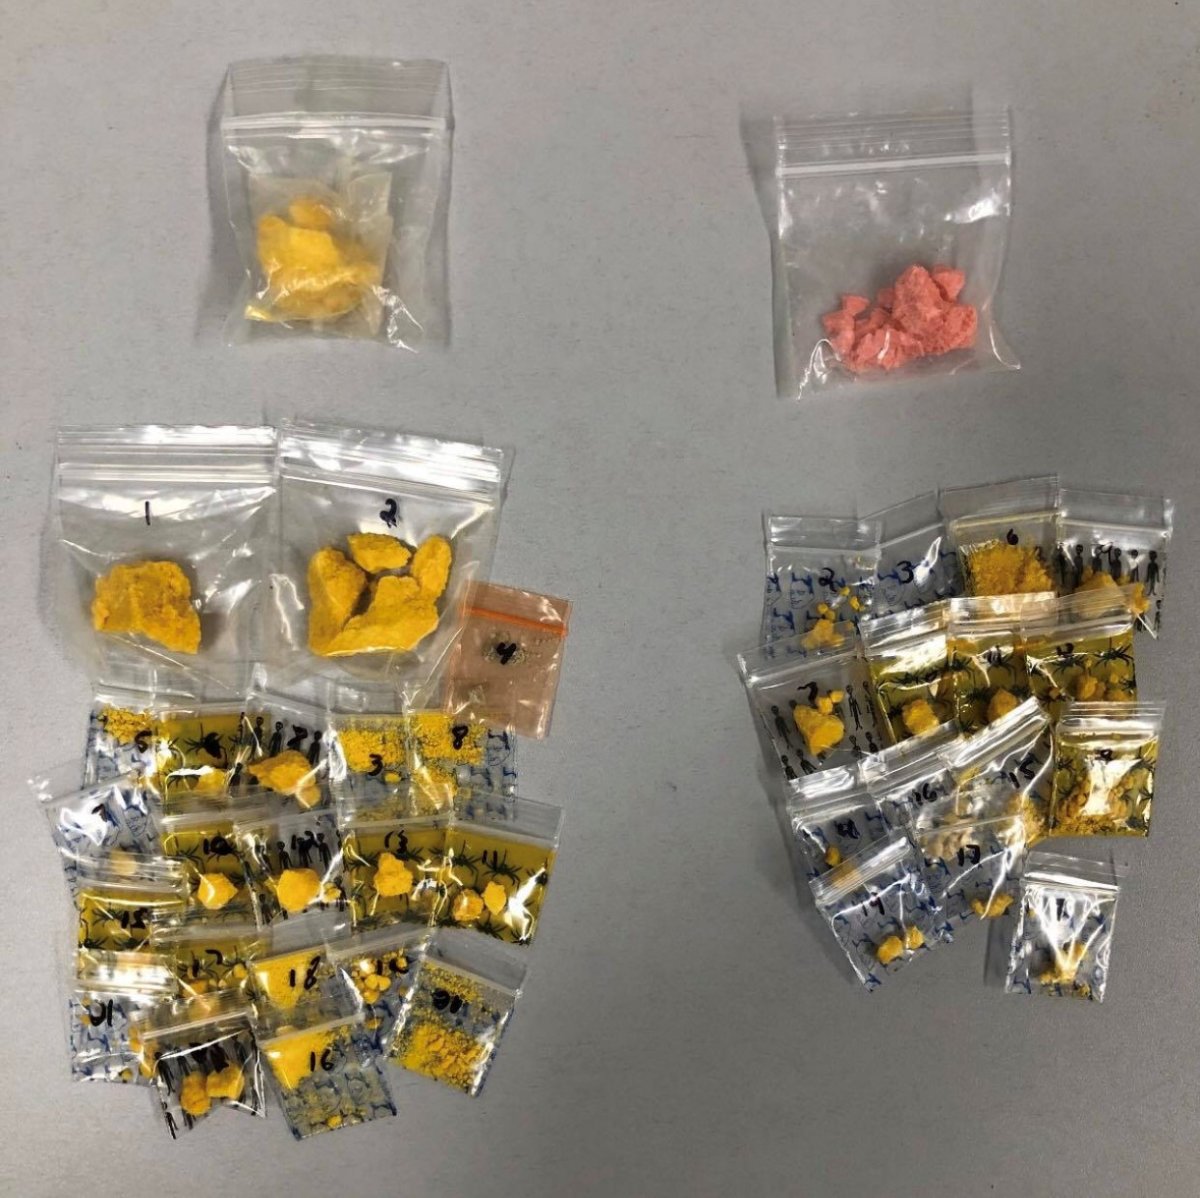 RCMP seized 28.5 grams of fentanyl from a home in Yorkton on Sept. 13. 